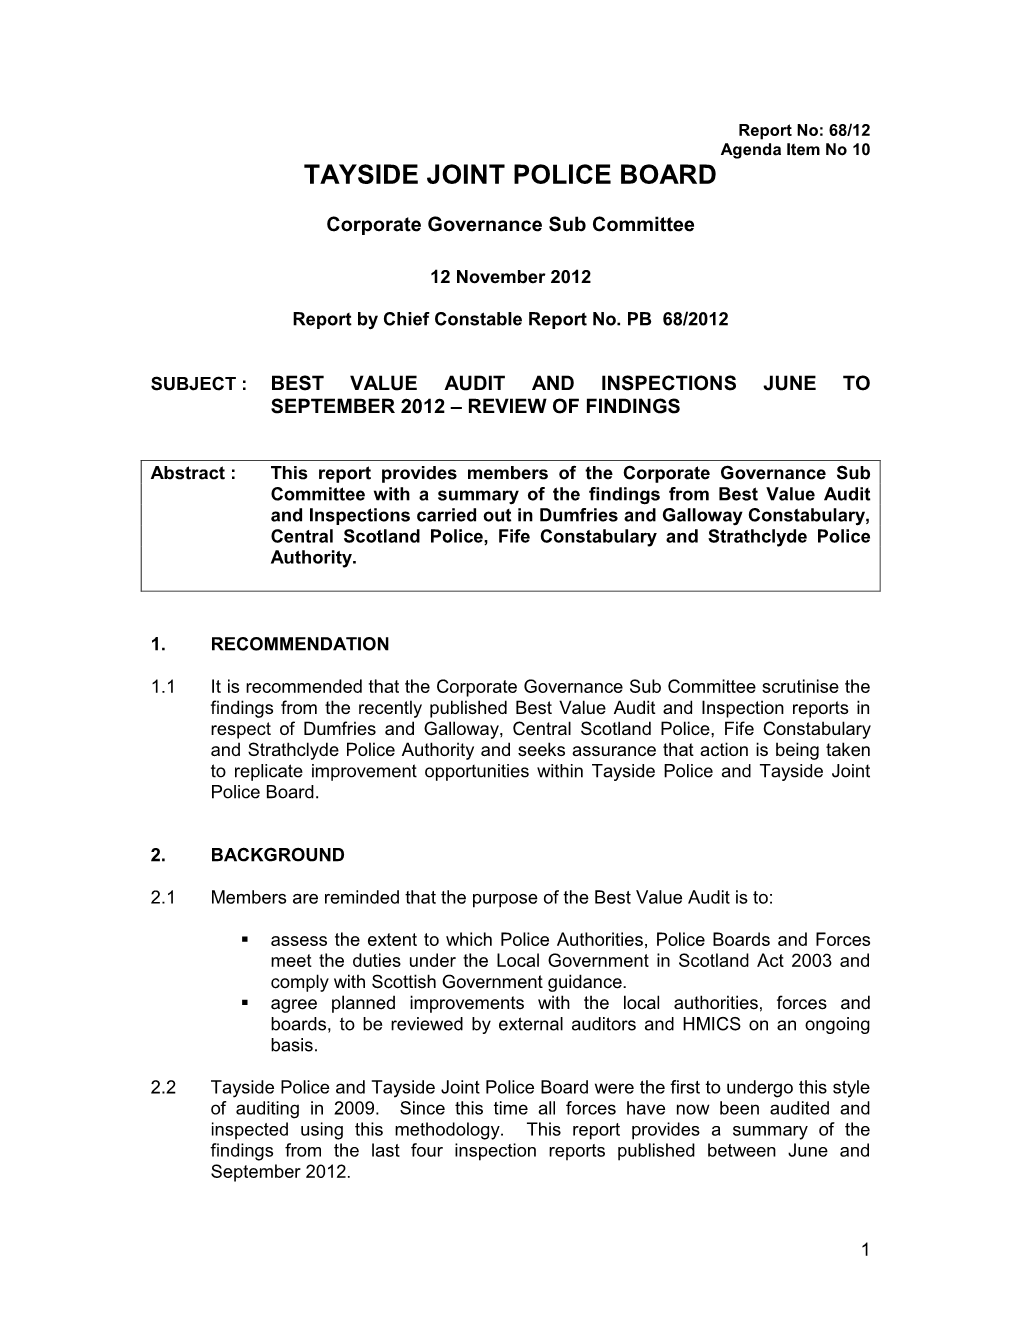 Tayside Joint Police Board